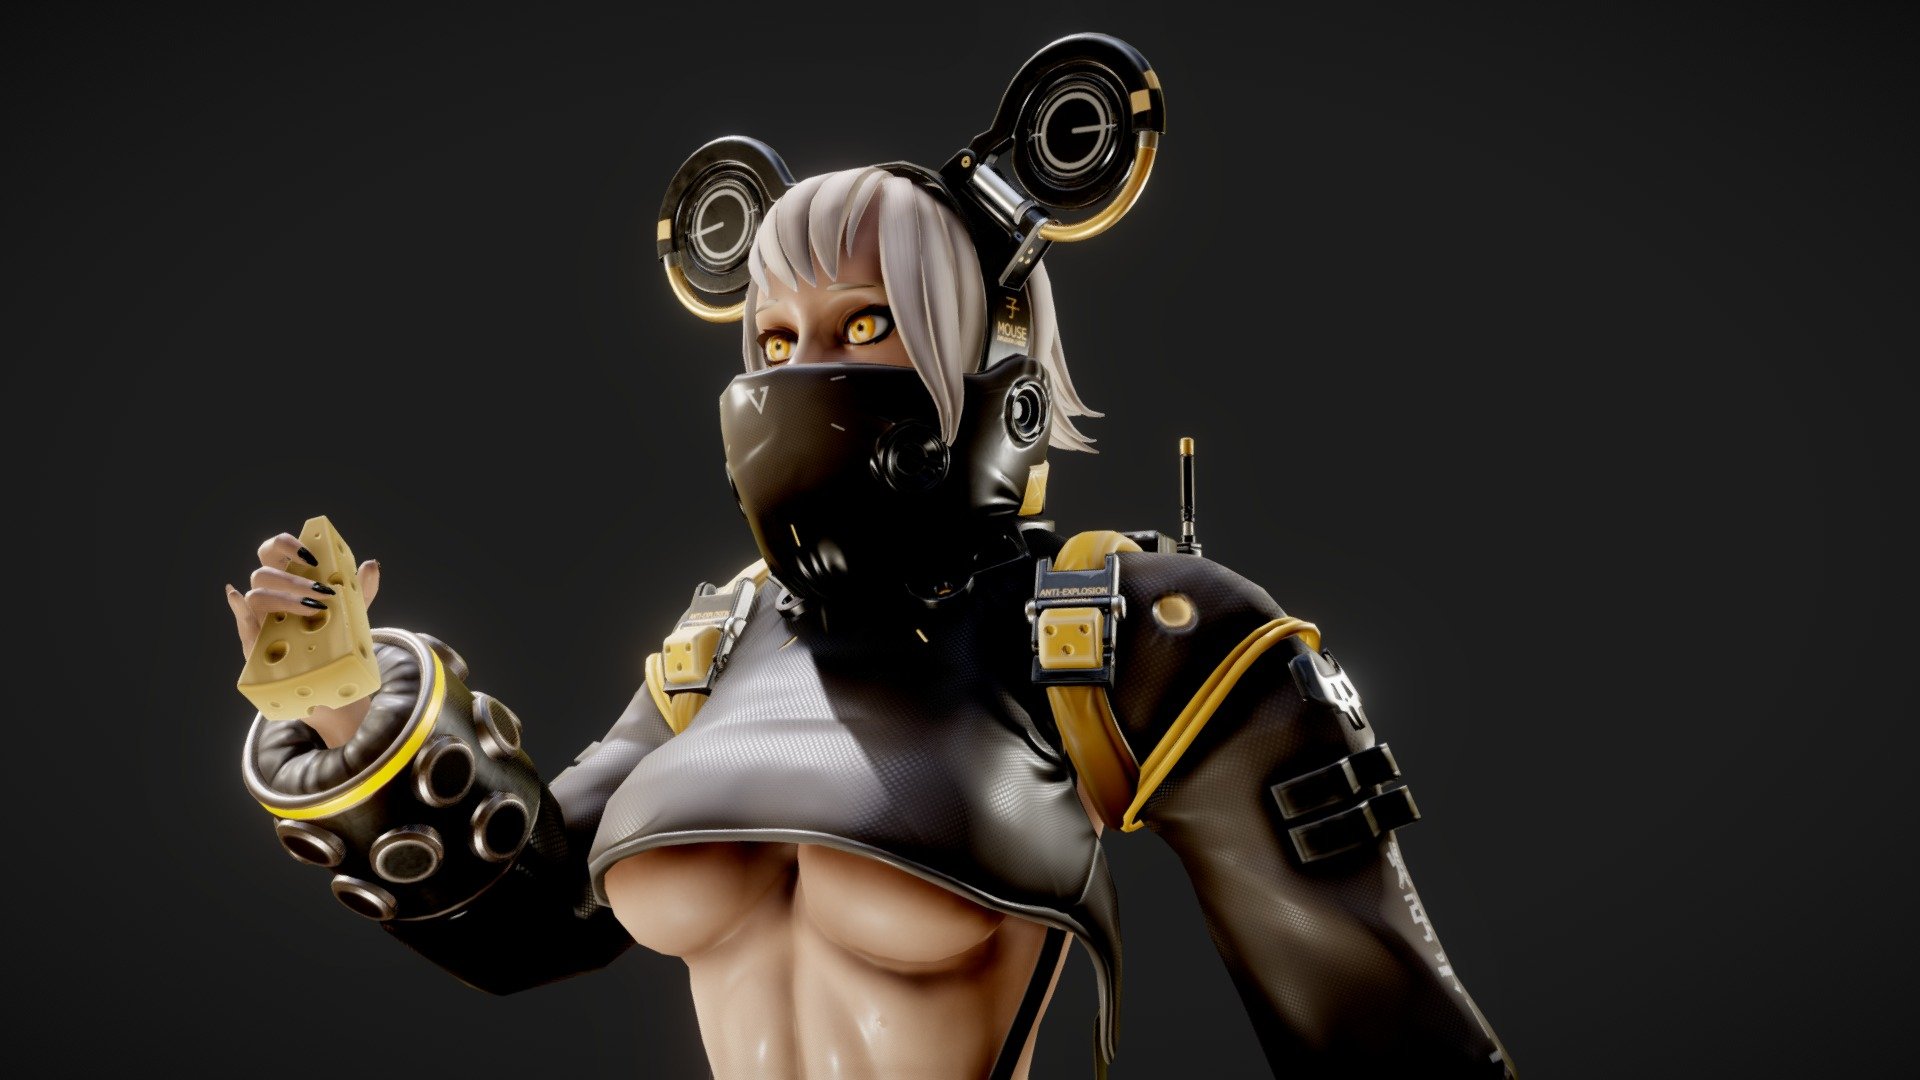 Renders: https://www.artstation.com/artwork/q9kBla

Sculpt in Zbrush, texturing in Substance Painter, retopo/rigging/fixes,render in Blender.
around 100k triangles, 6 UV sets for the character, 1 set for the pistol.

Based on the concept by Ren Wei Pan - Mouse Girl - Explosive Cheese - 3D model by amazingStanley 3d model